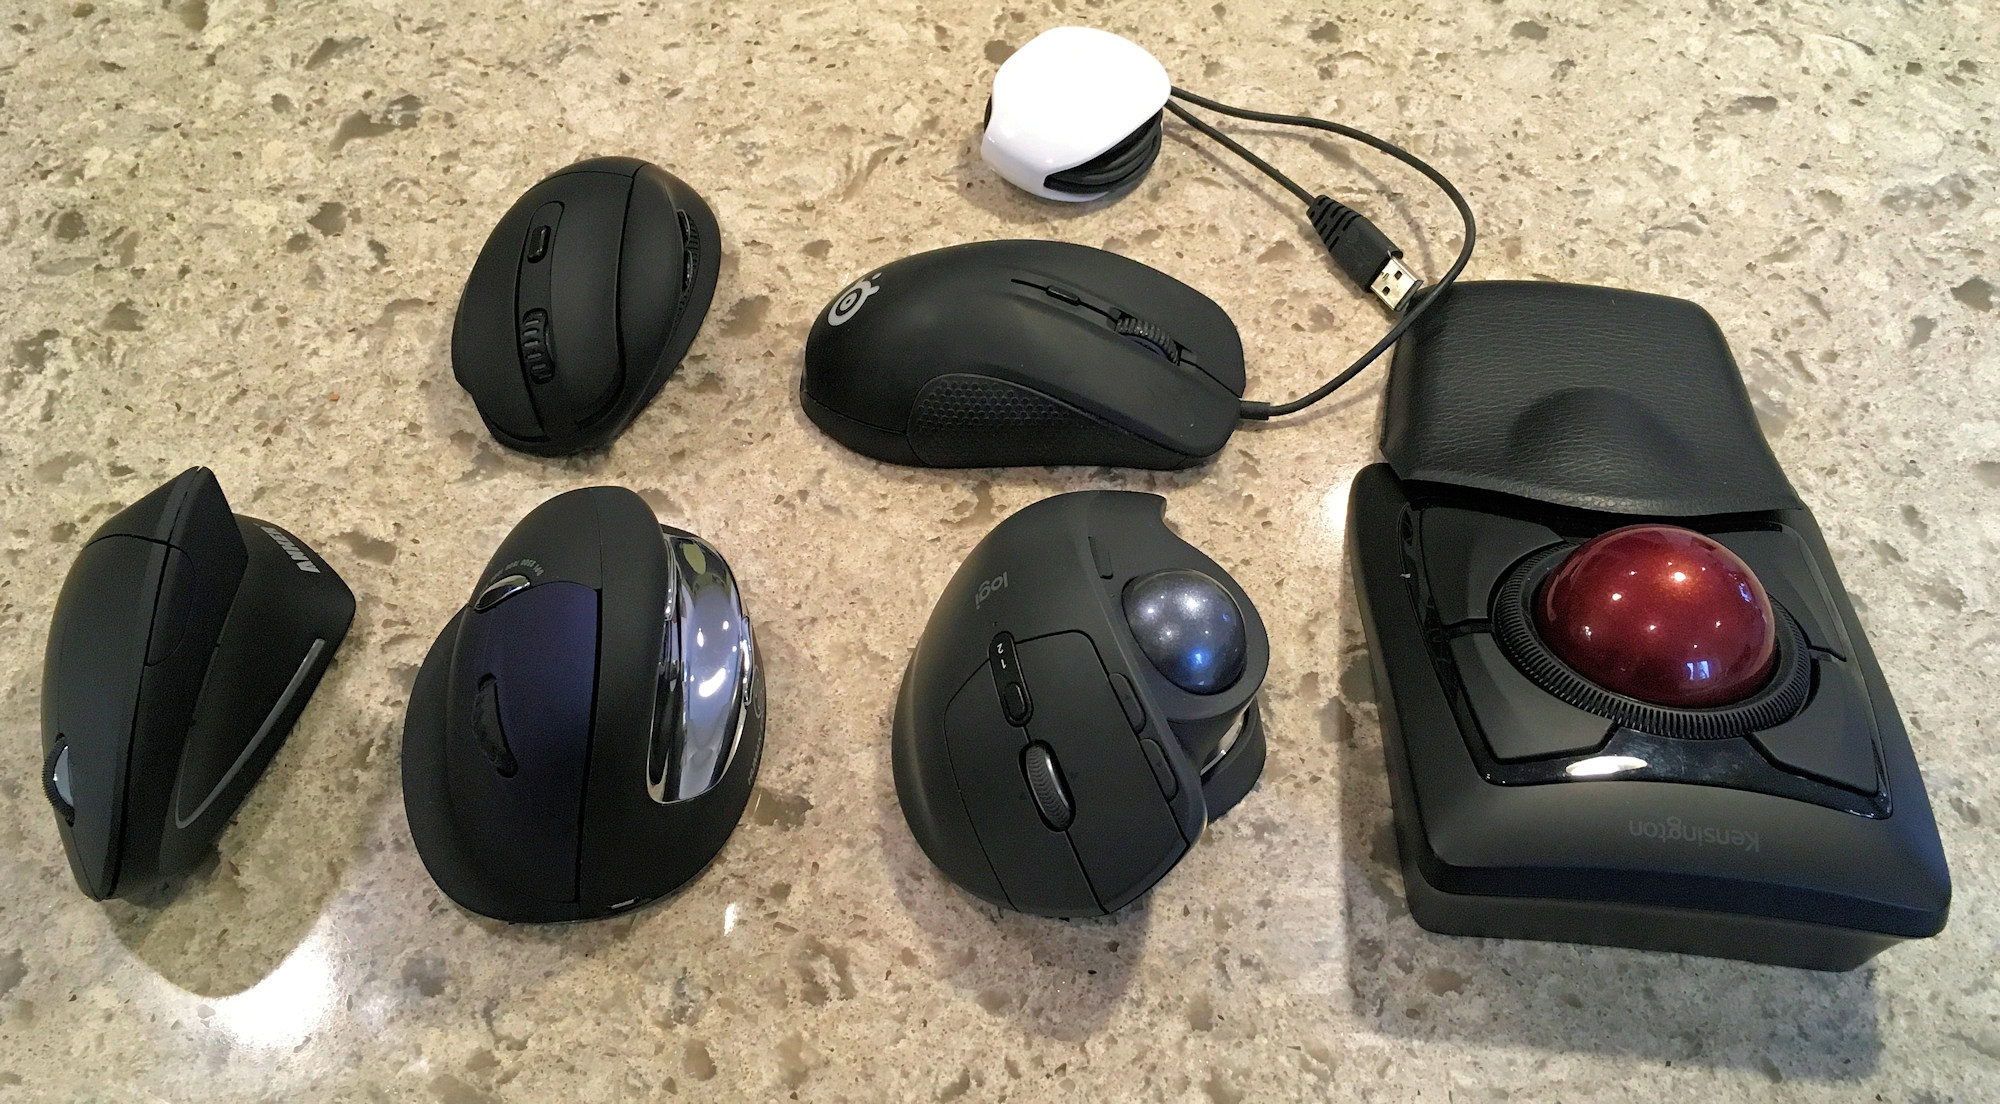 All the mice tested